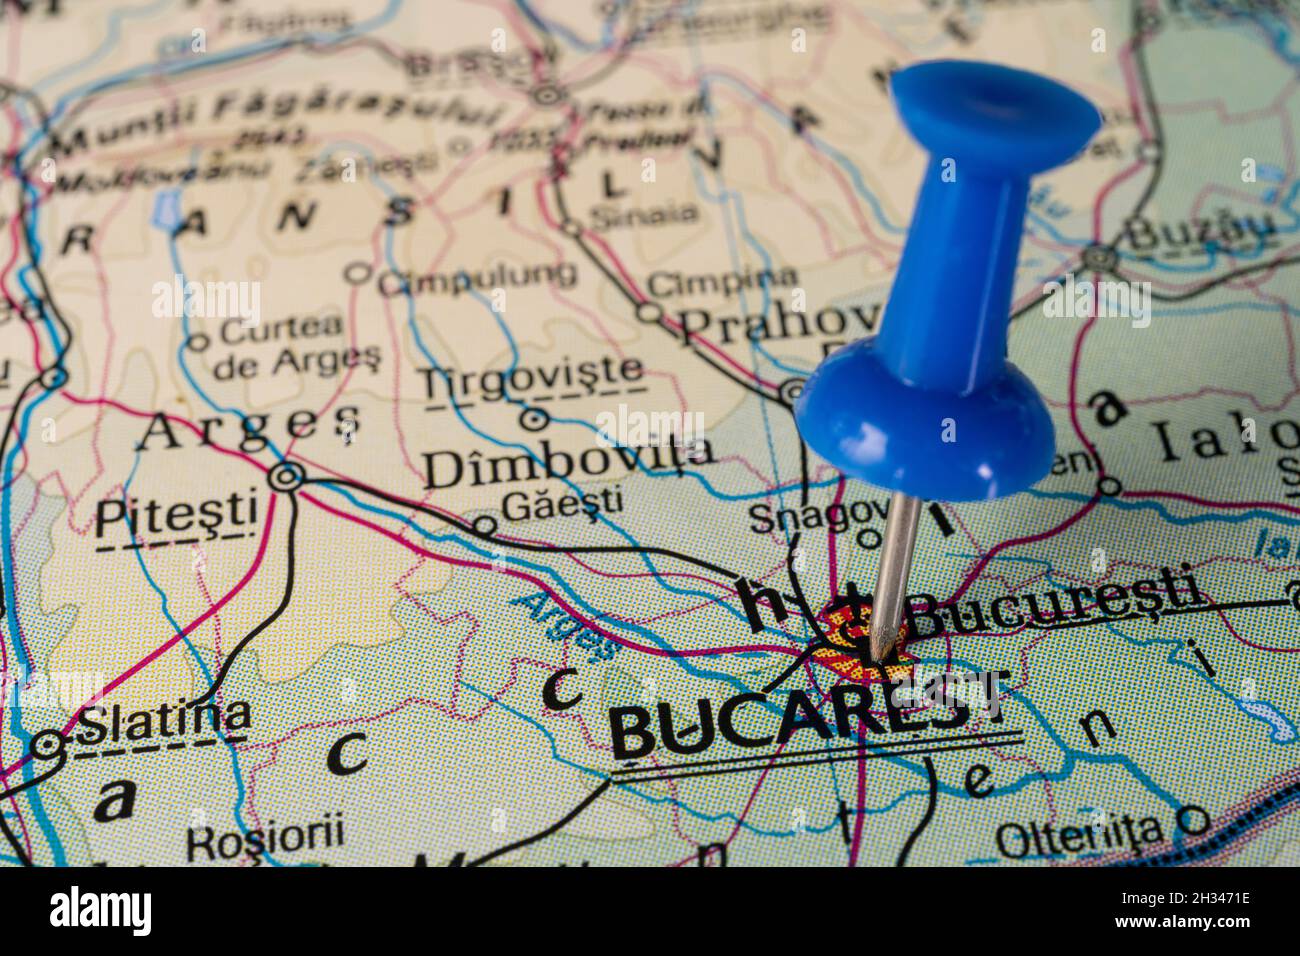 Bucharest, Romania pinned on colorful political map. Geopolitical school atlas. Stock Photo